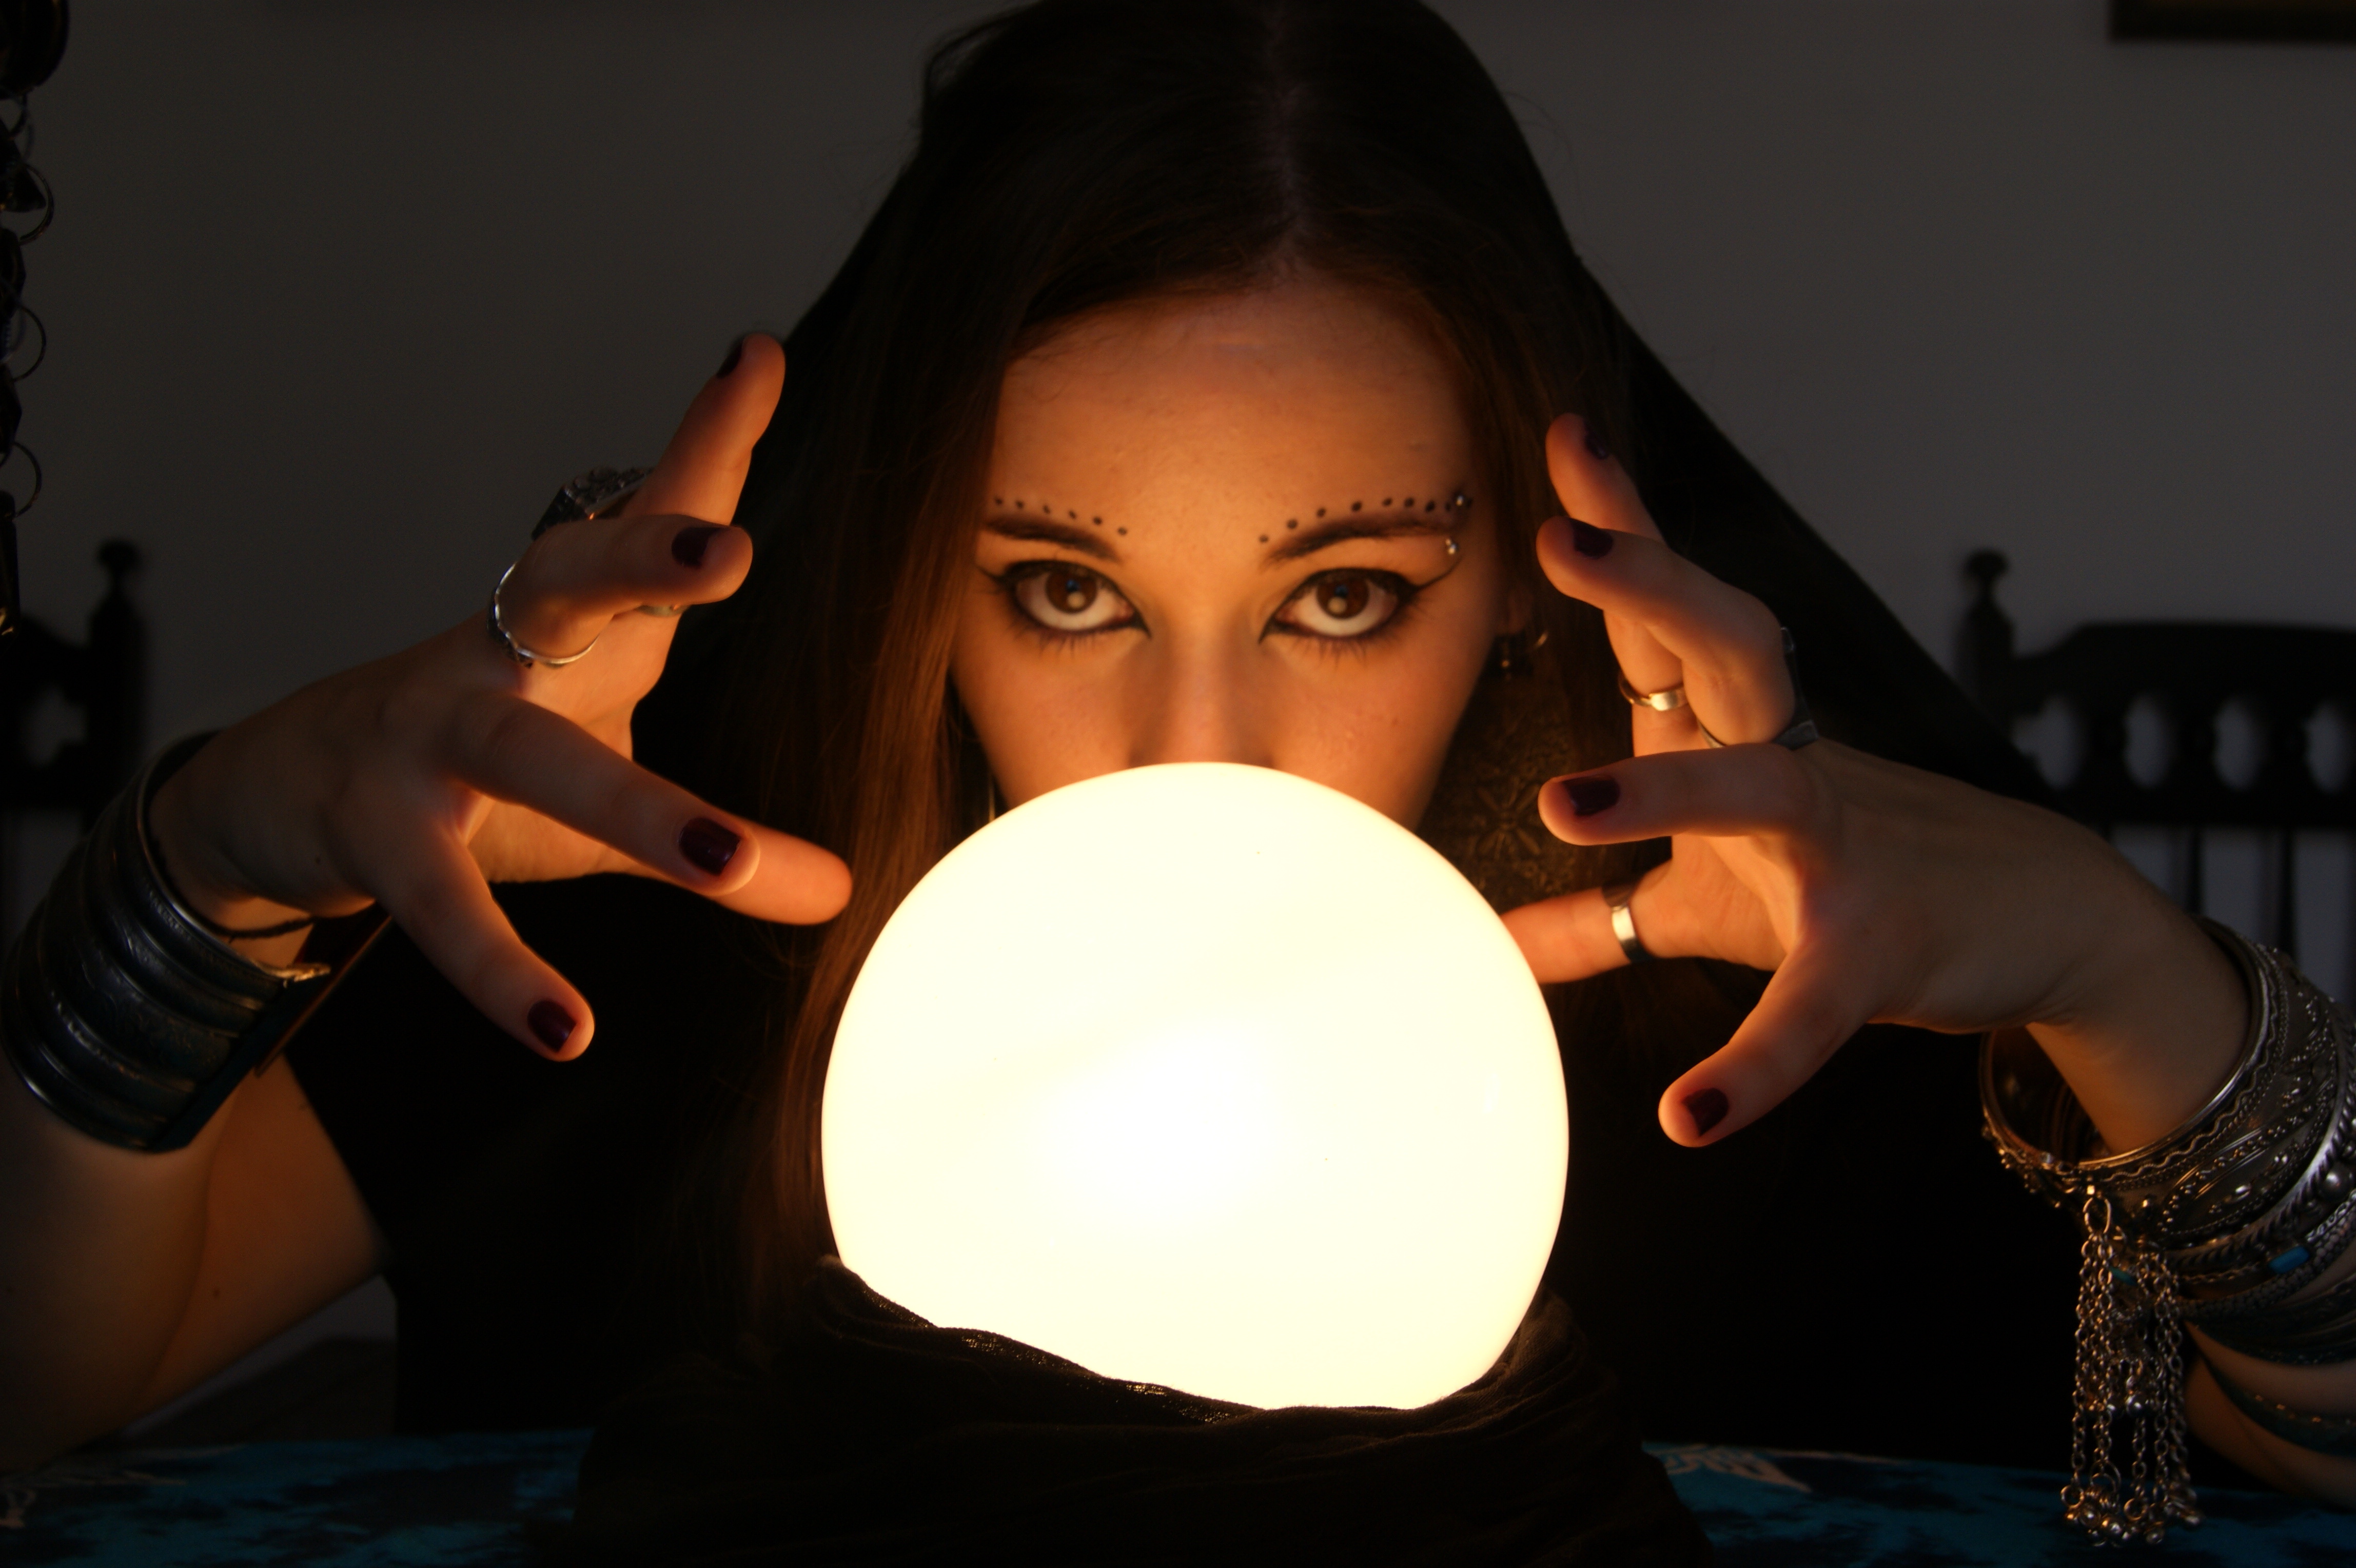 fortune, Teller, Witch, Occult, Crystal, Ball, Fantasy, Women, Females, Face Wallpaper